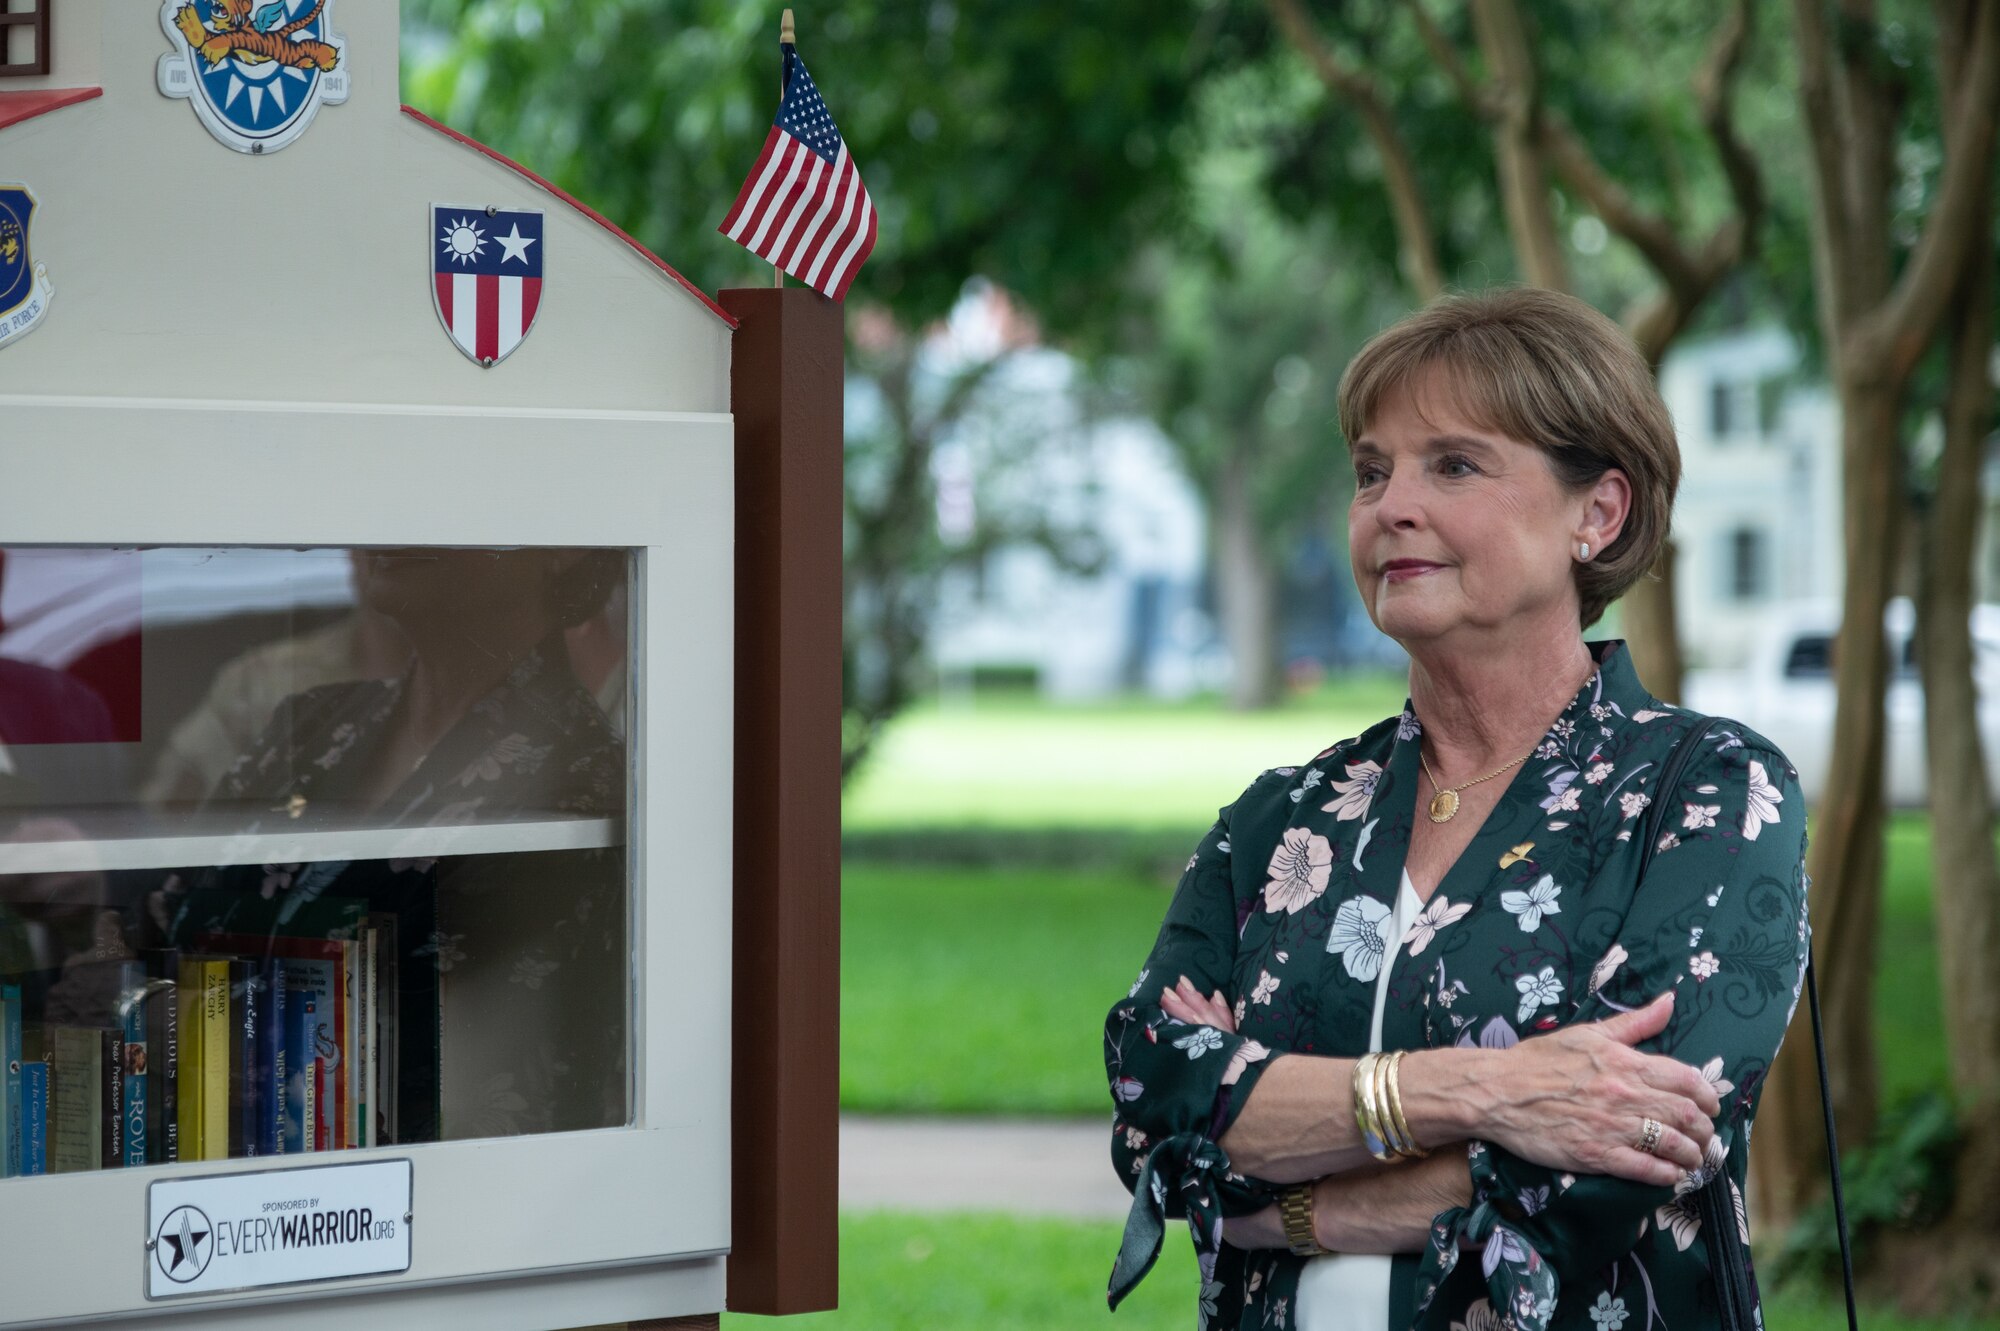 Nell Calloway, president of the Chennault Museum, stands next to the new community book exchange box at Barksdale Air Force Base, June 8, 2021. Calloway is the granddaughter of Lt. Gen. Claire Chennault, to whom the book exchange box is dedicated.